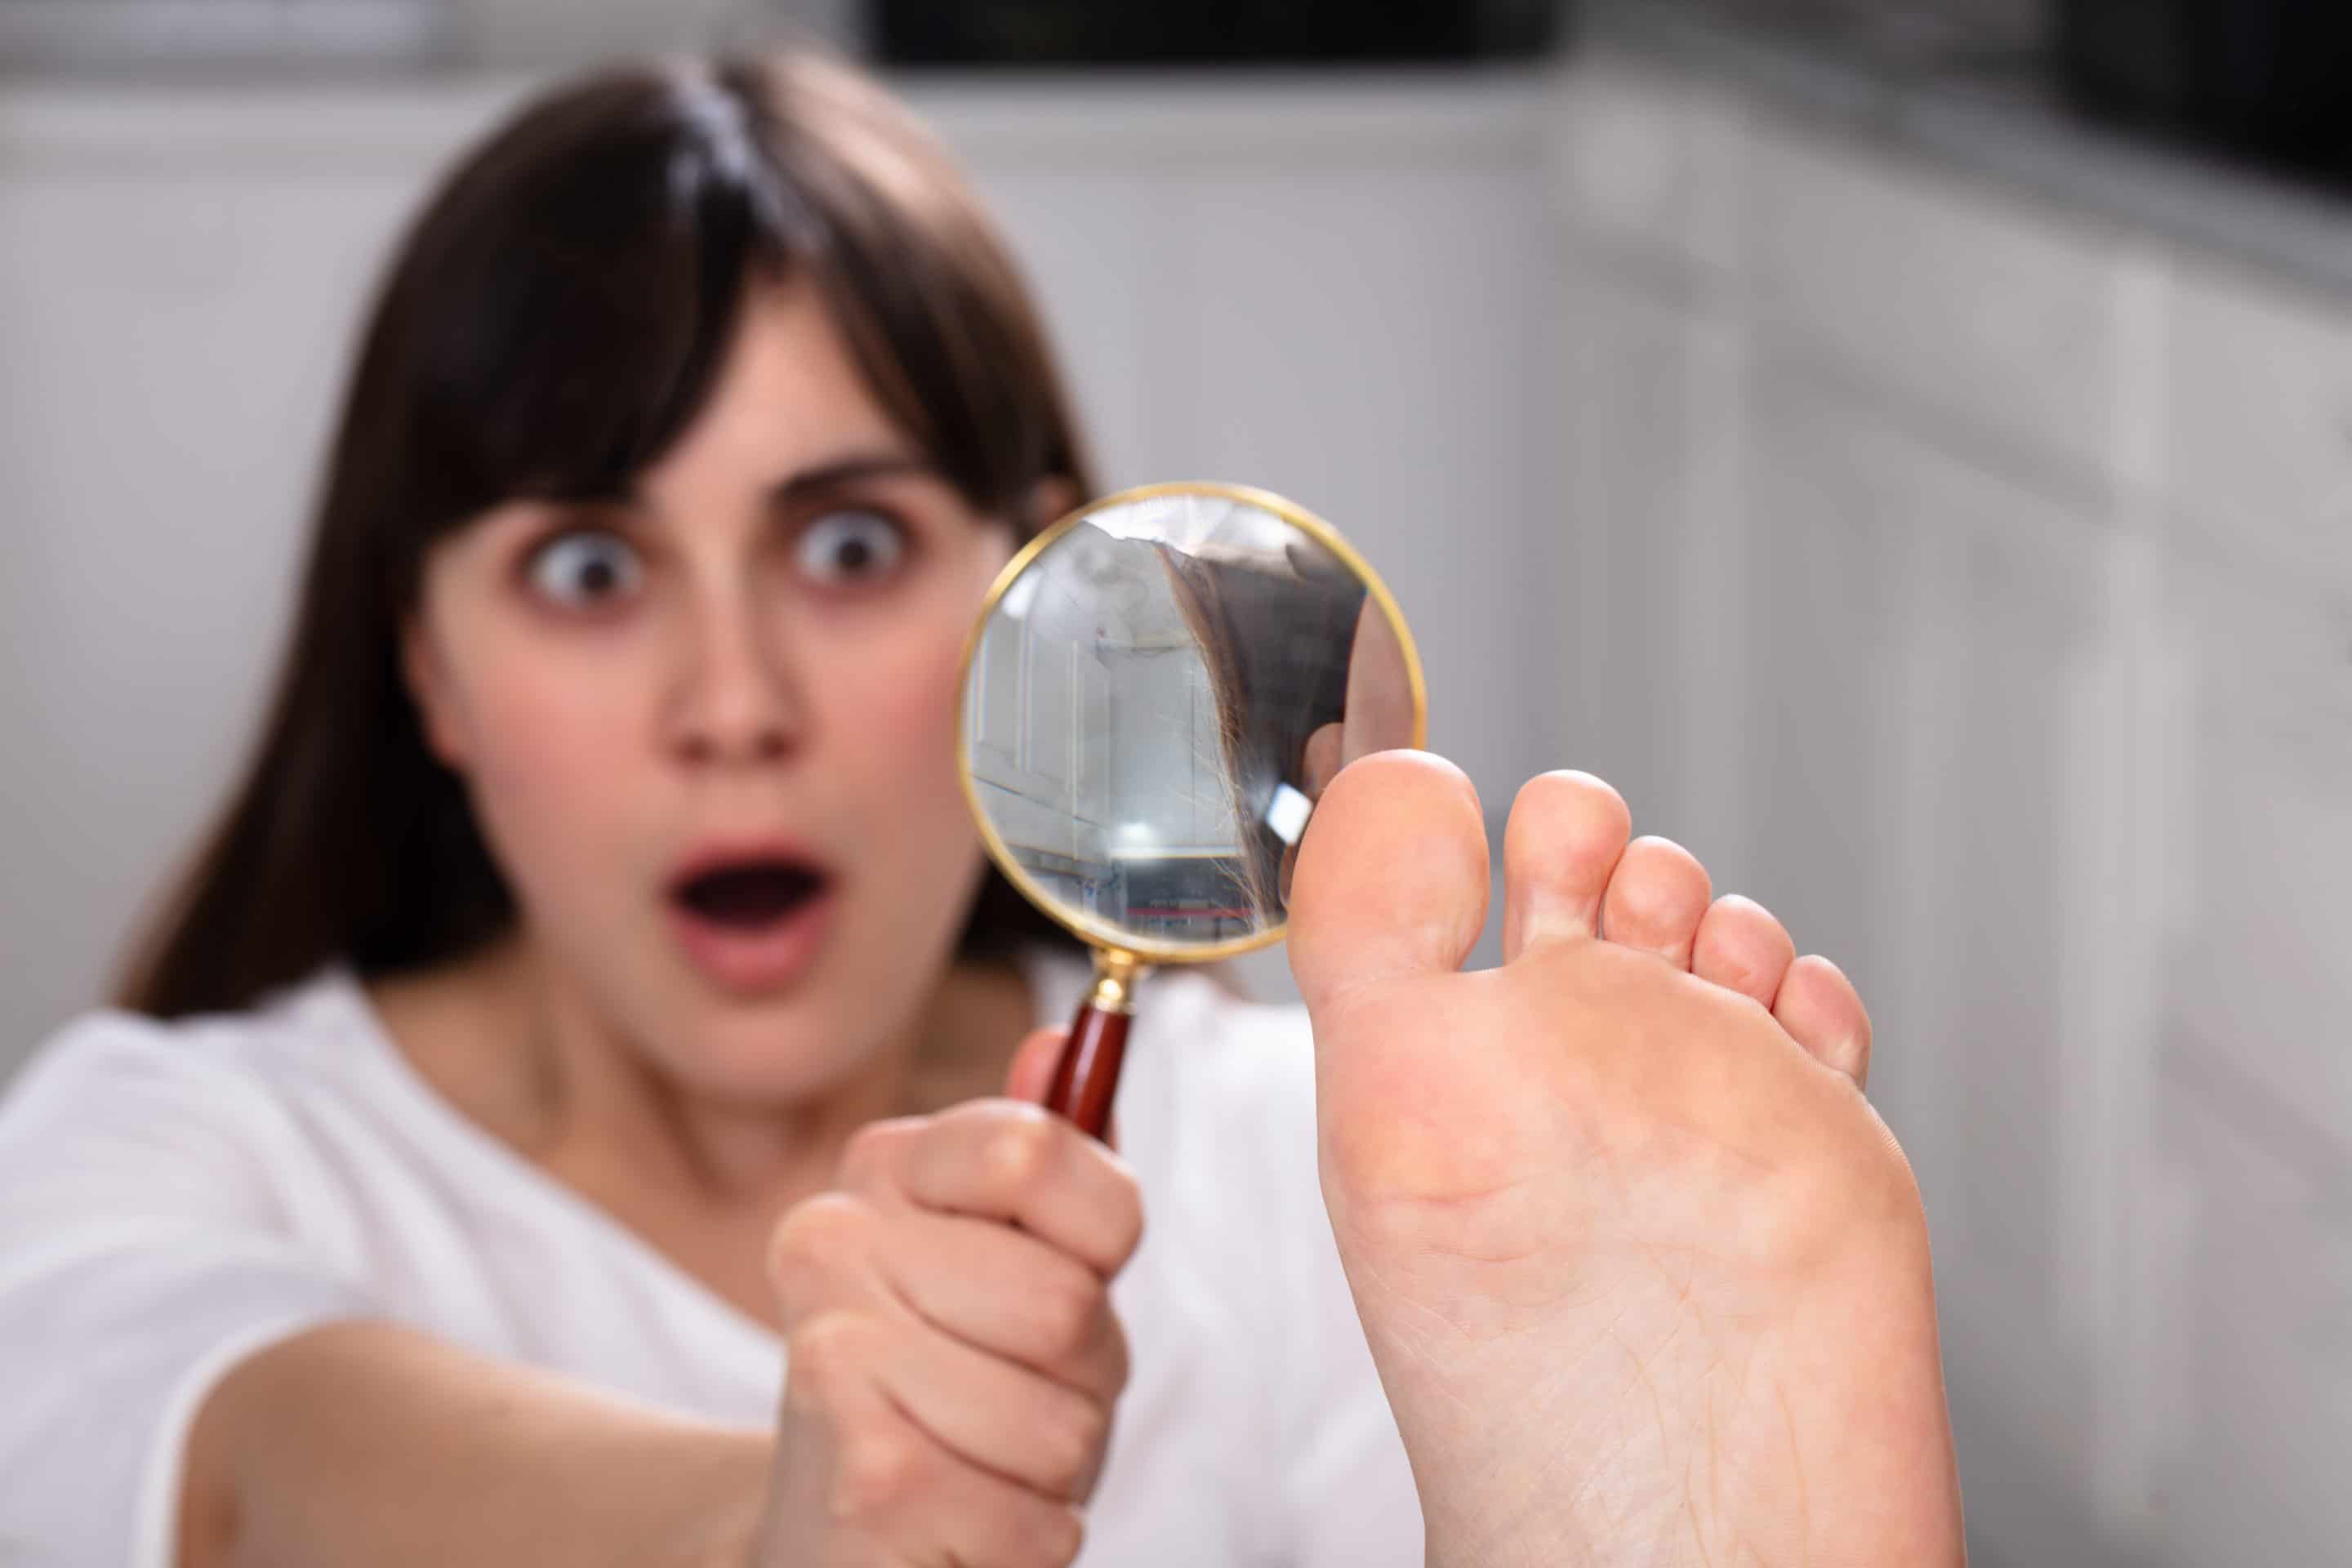 Are You Being Haunted by Your Ingrown Toenails?